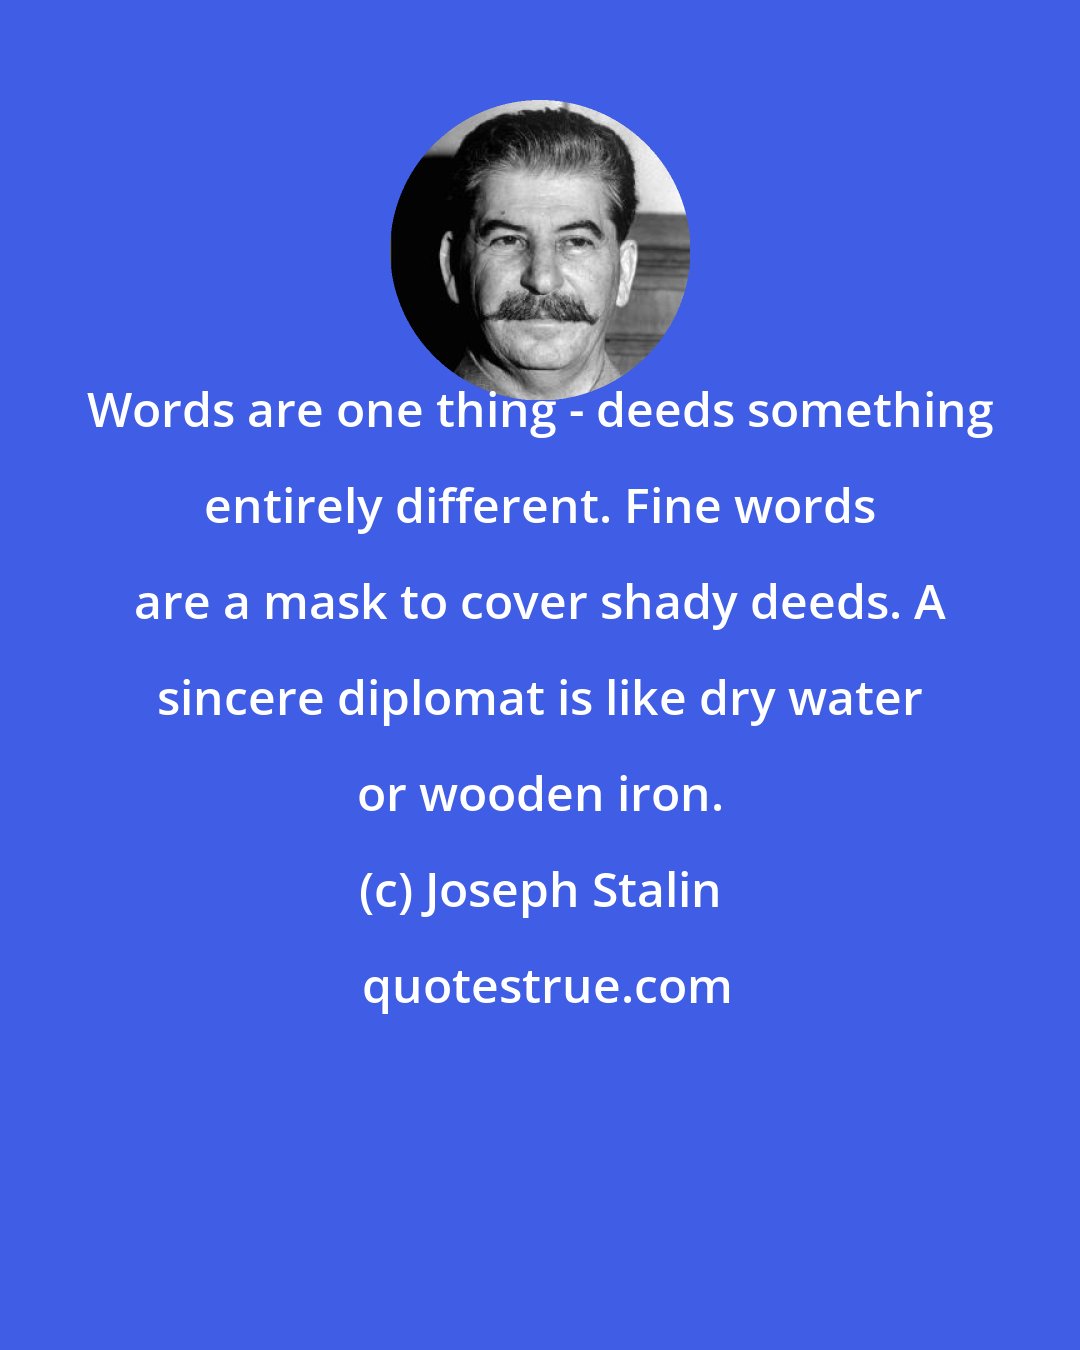 Joseph Stalin: Words are one thing - deeds something entirely different. Fine words are a mask to cover shady deeds. A sincere diplomat is like dry water or wooden iron.